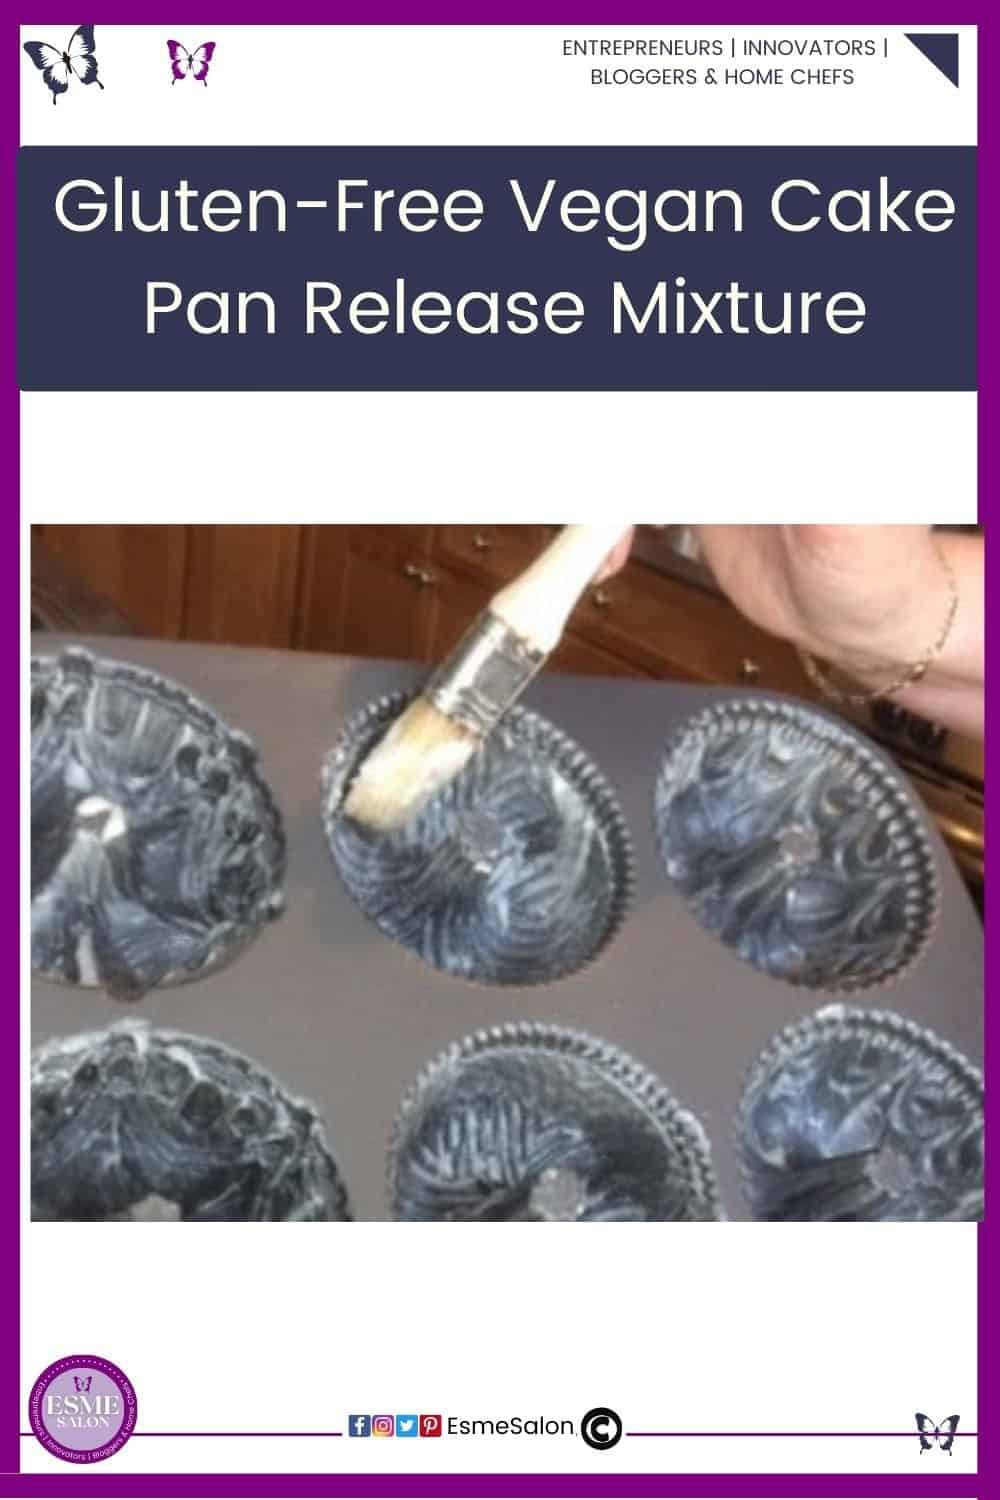 an image of a mini Bundt pan and Gluten-Free Vegan Cake Pan Release Mixture painted with a kitchen brush in the Bundt cavities